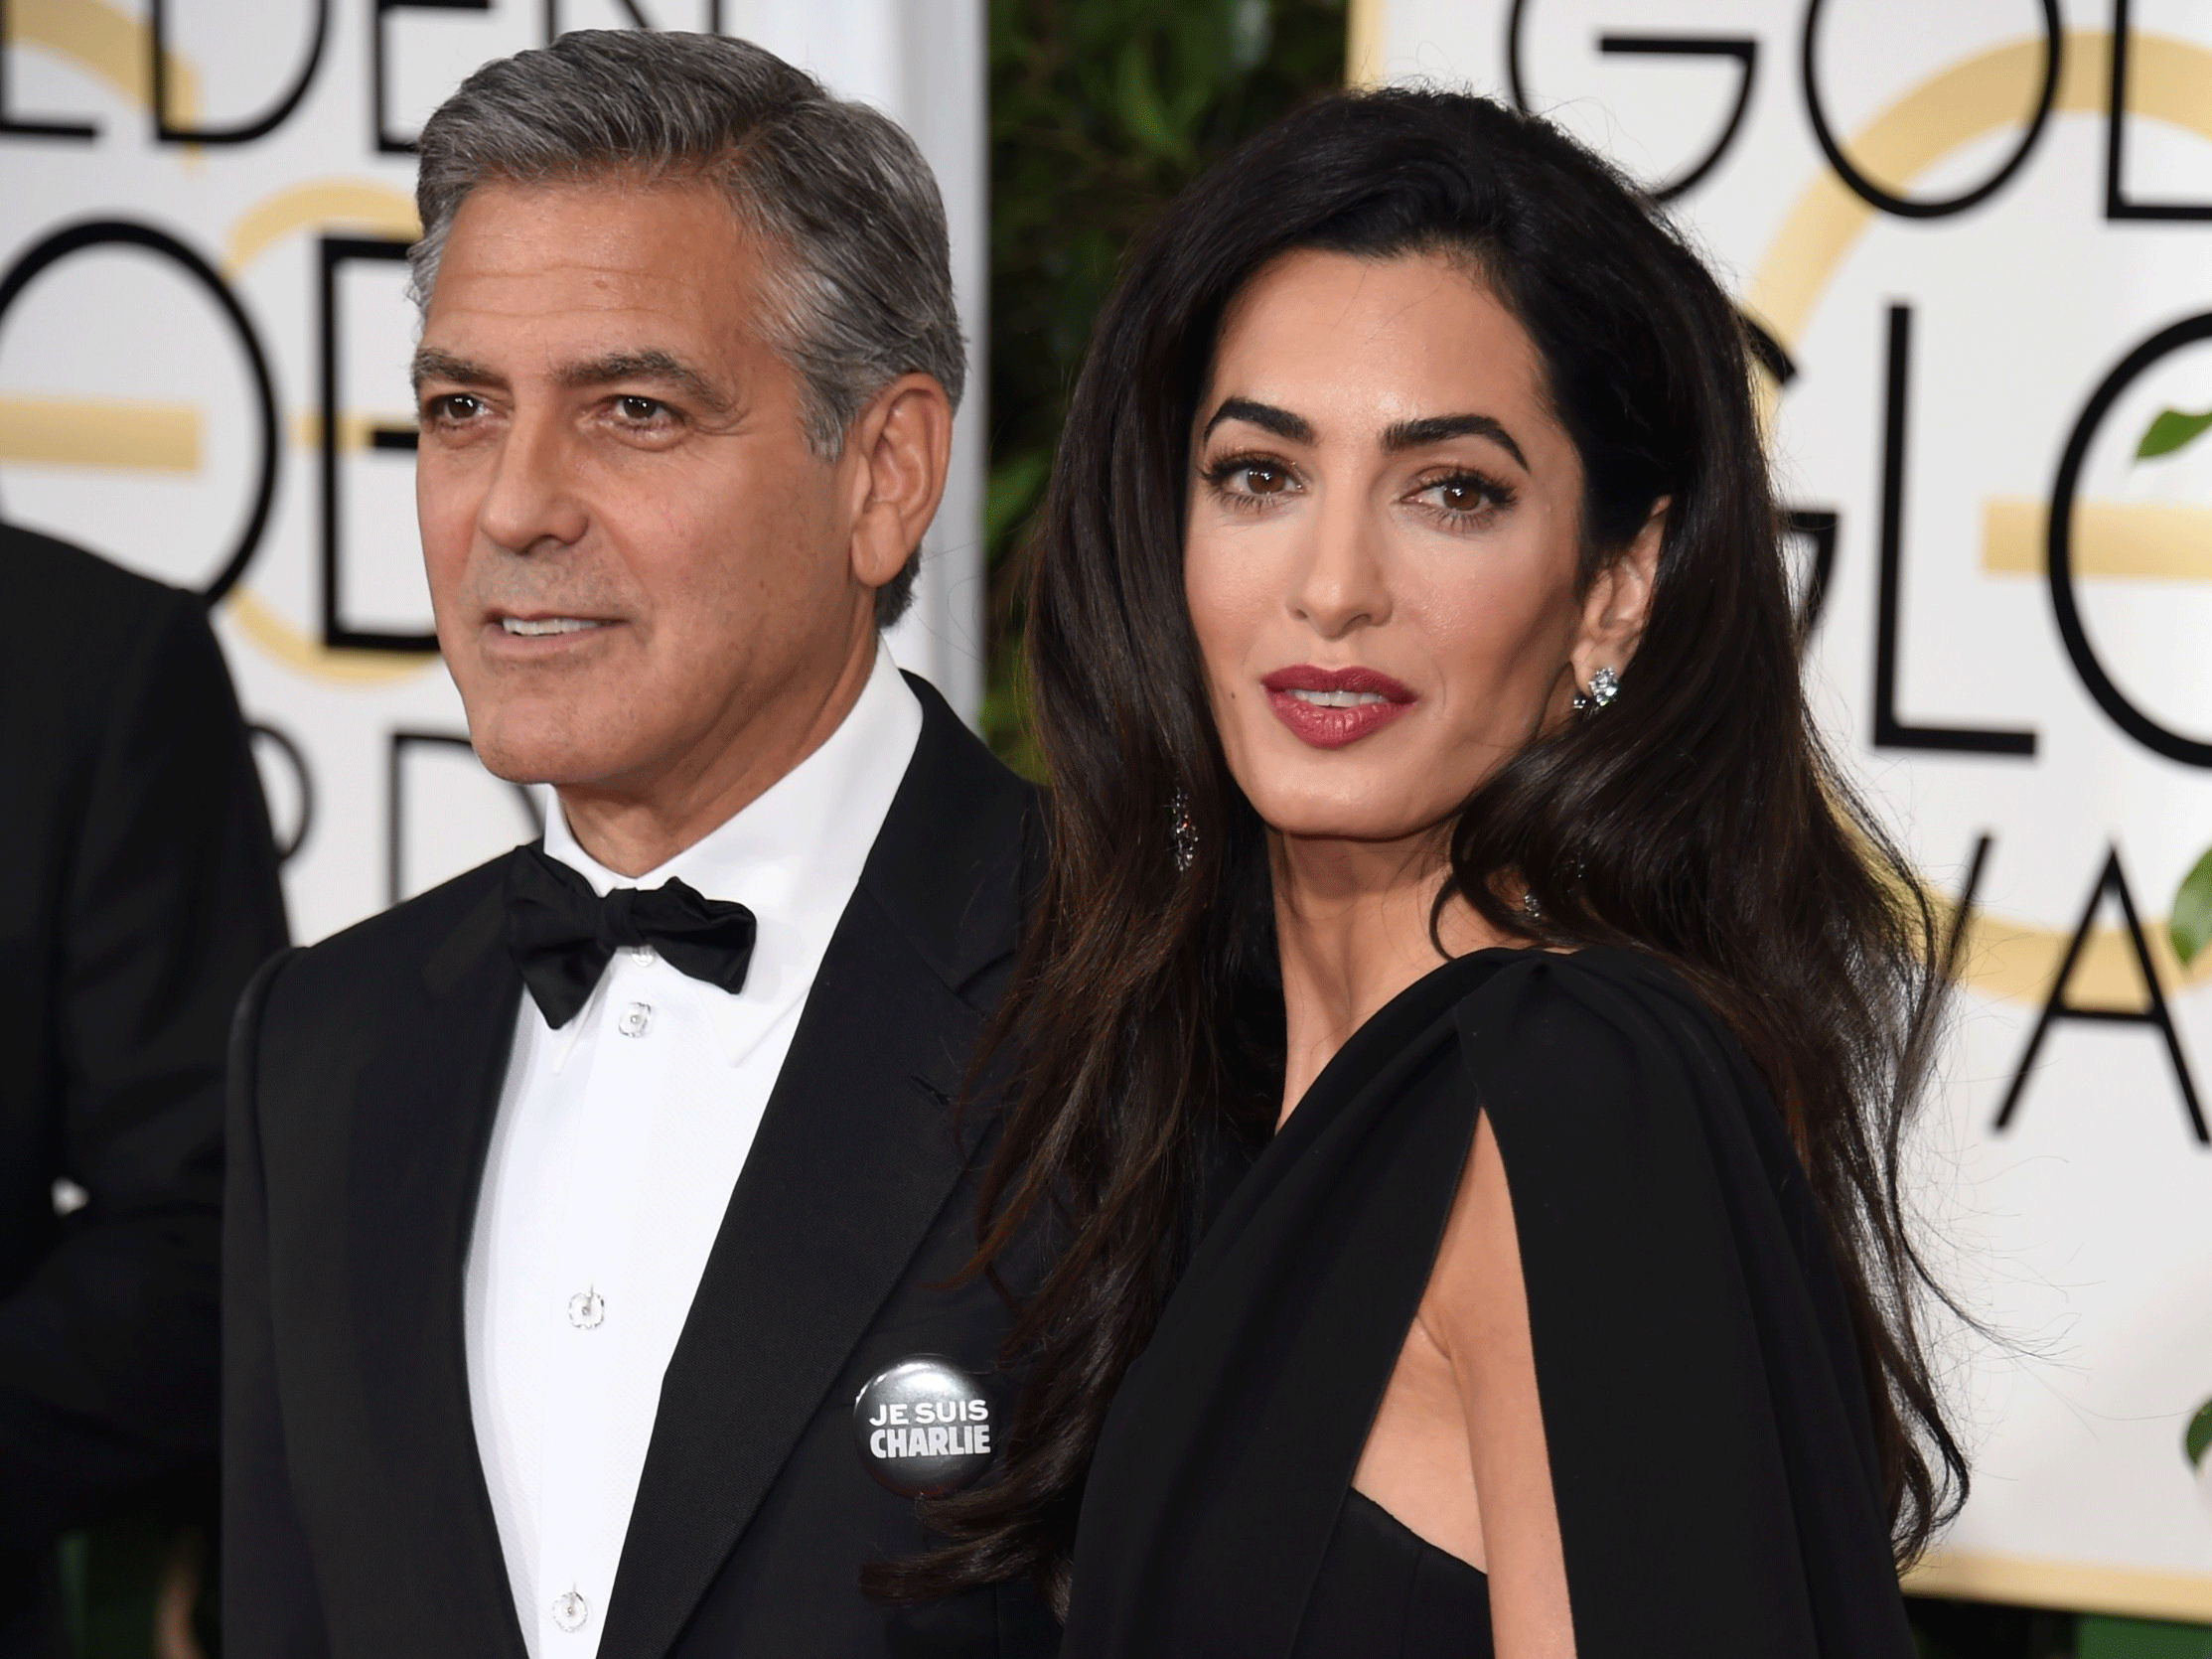 George Clooney wearing a 'Je suis Charlie' badge with his wife, Amal